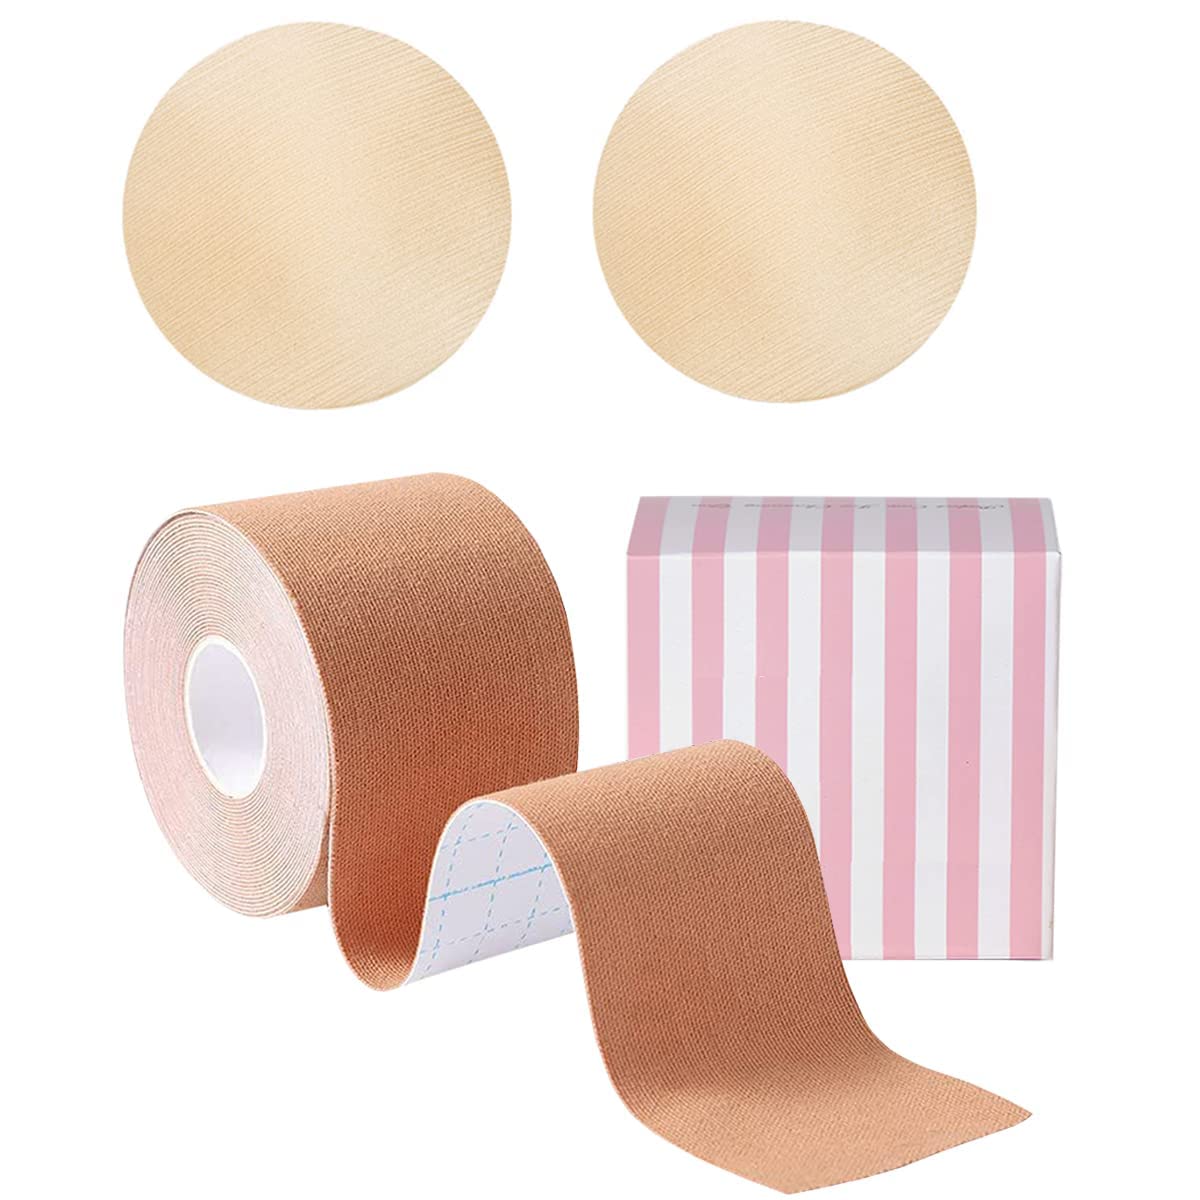 POMAMZ Boob Tape Bob Tape for Large Breast Boobtapes with Nipple Covers,  Adhesive Bra Nipple tape for Breast Lift, 16.5 Feet Extra-Long Bra Tape